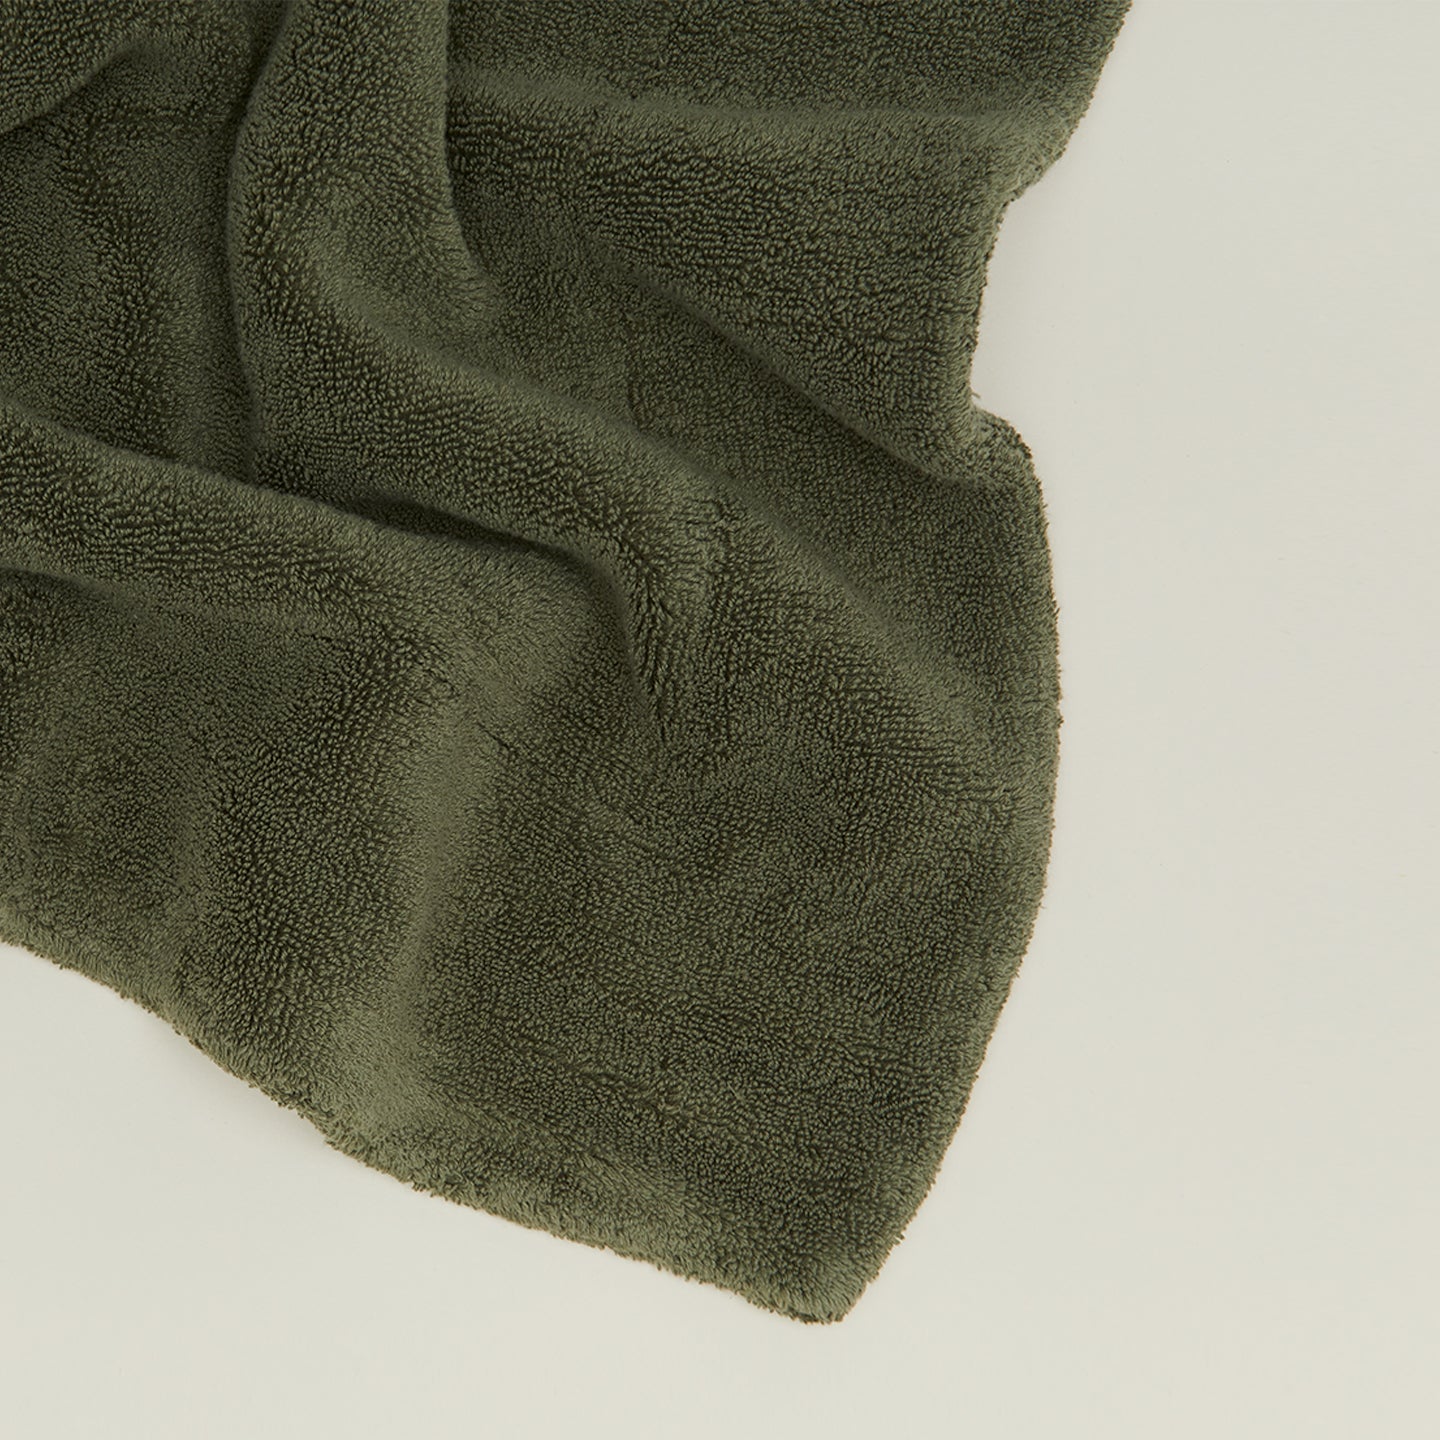 Simple Terry Bath Mat - Olive